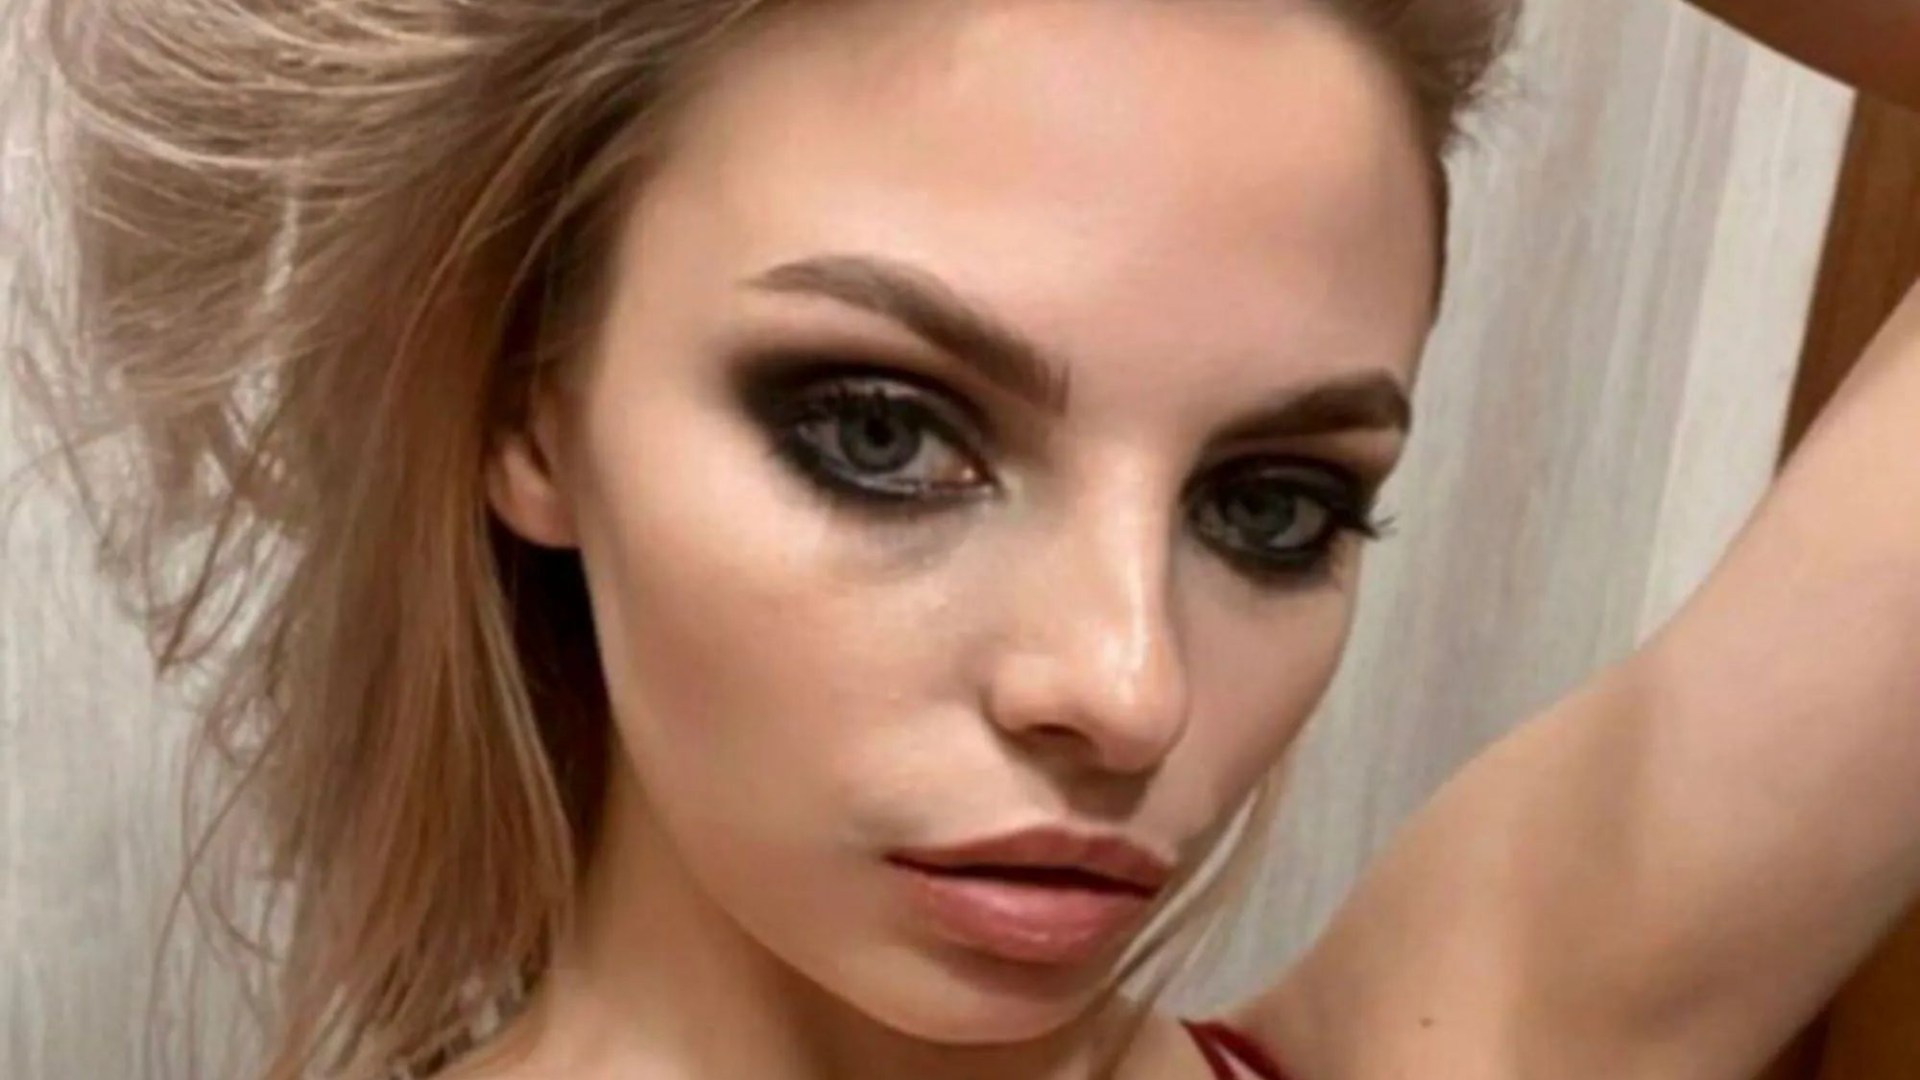 Model, 27, hunted by Putins cronies & issued 1000 fine after saying Russian women arent pretty’ in online rant [Video]